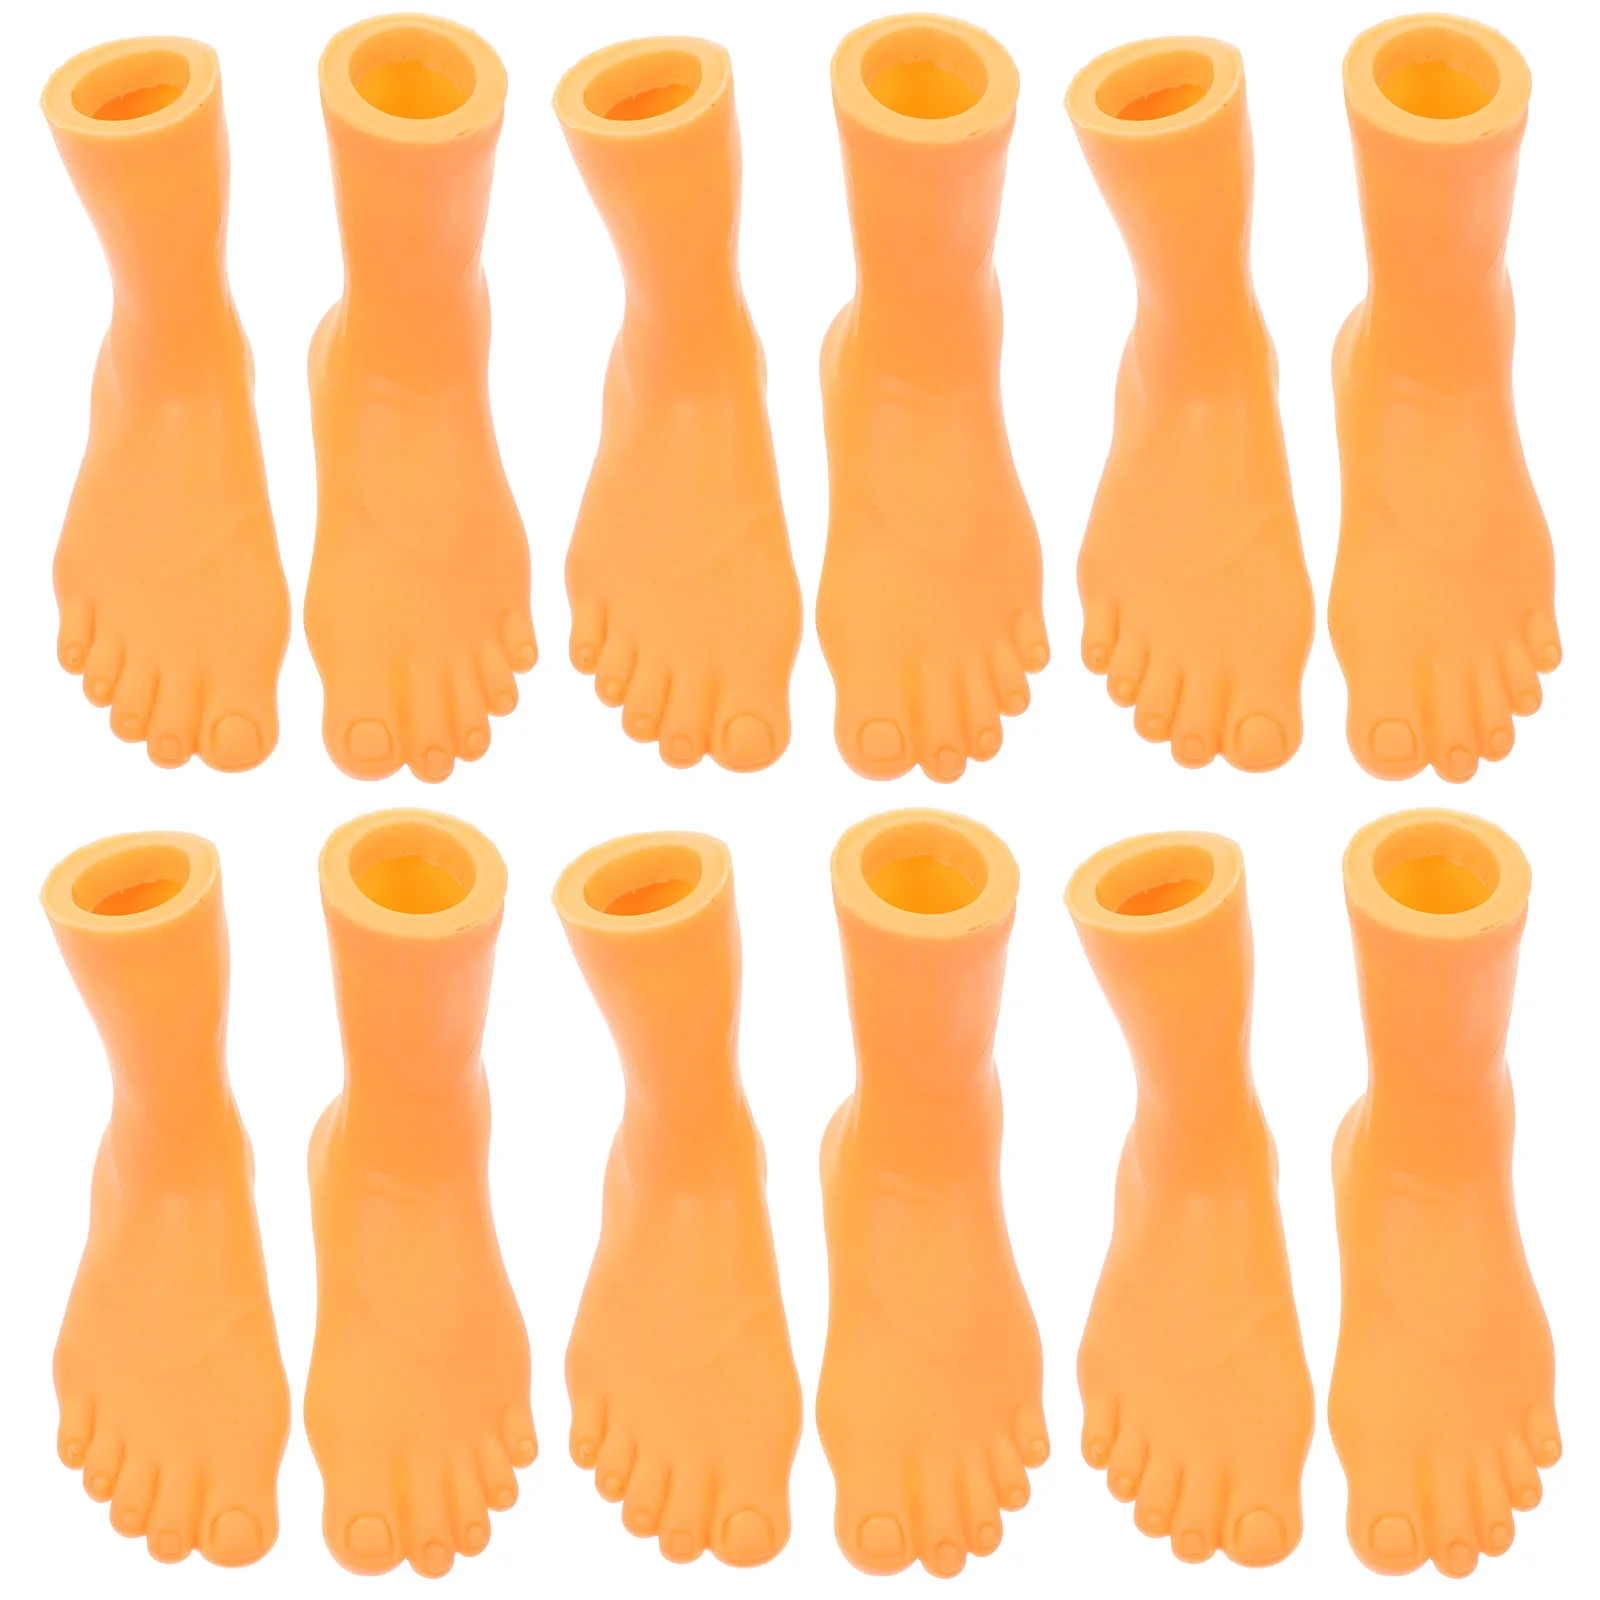 

6 Pairs Infant Developmental Toys Finger Booties Left Right Foot Model Puppet Puppets Kids Babies Supply Baby